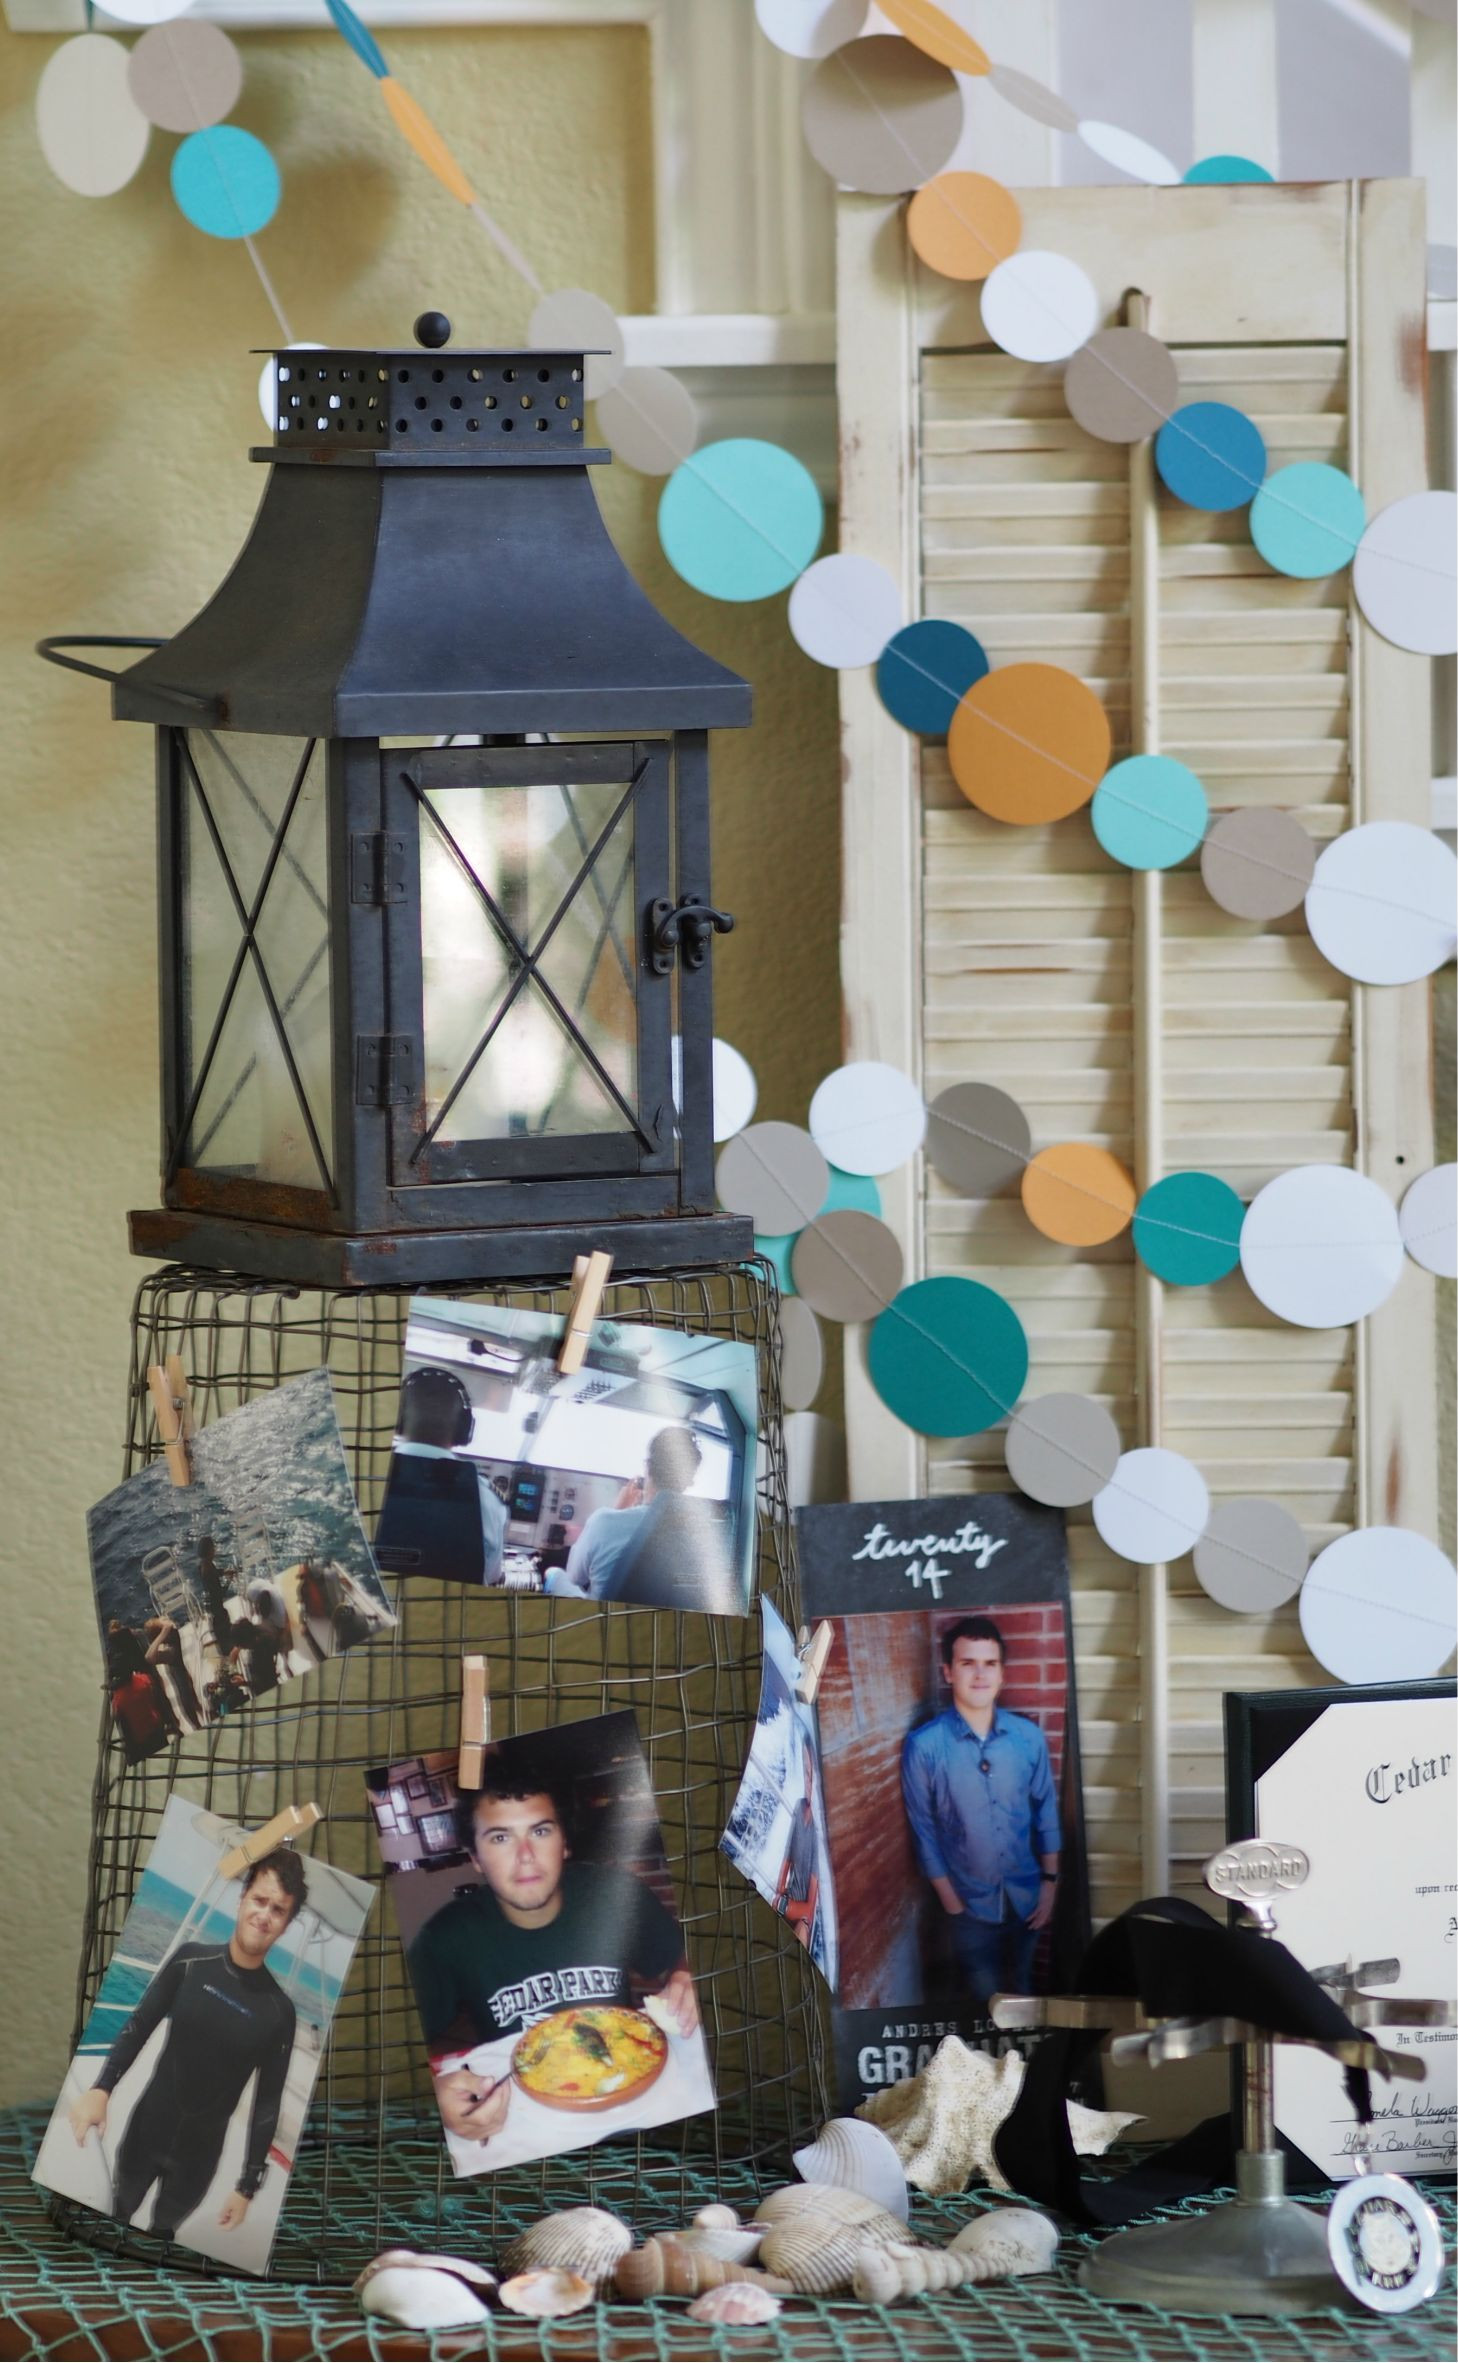 Backyard College Graduation Party Ideas
 We Heart Parties Ocean Themed Graduation With images